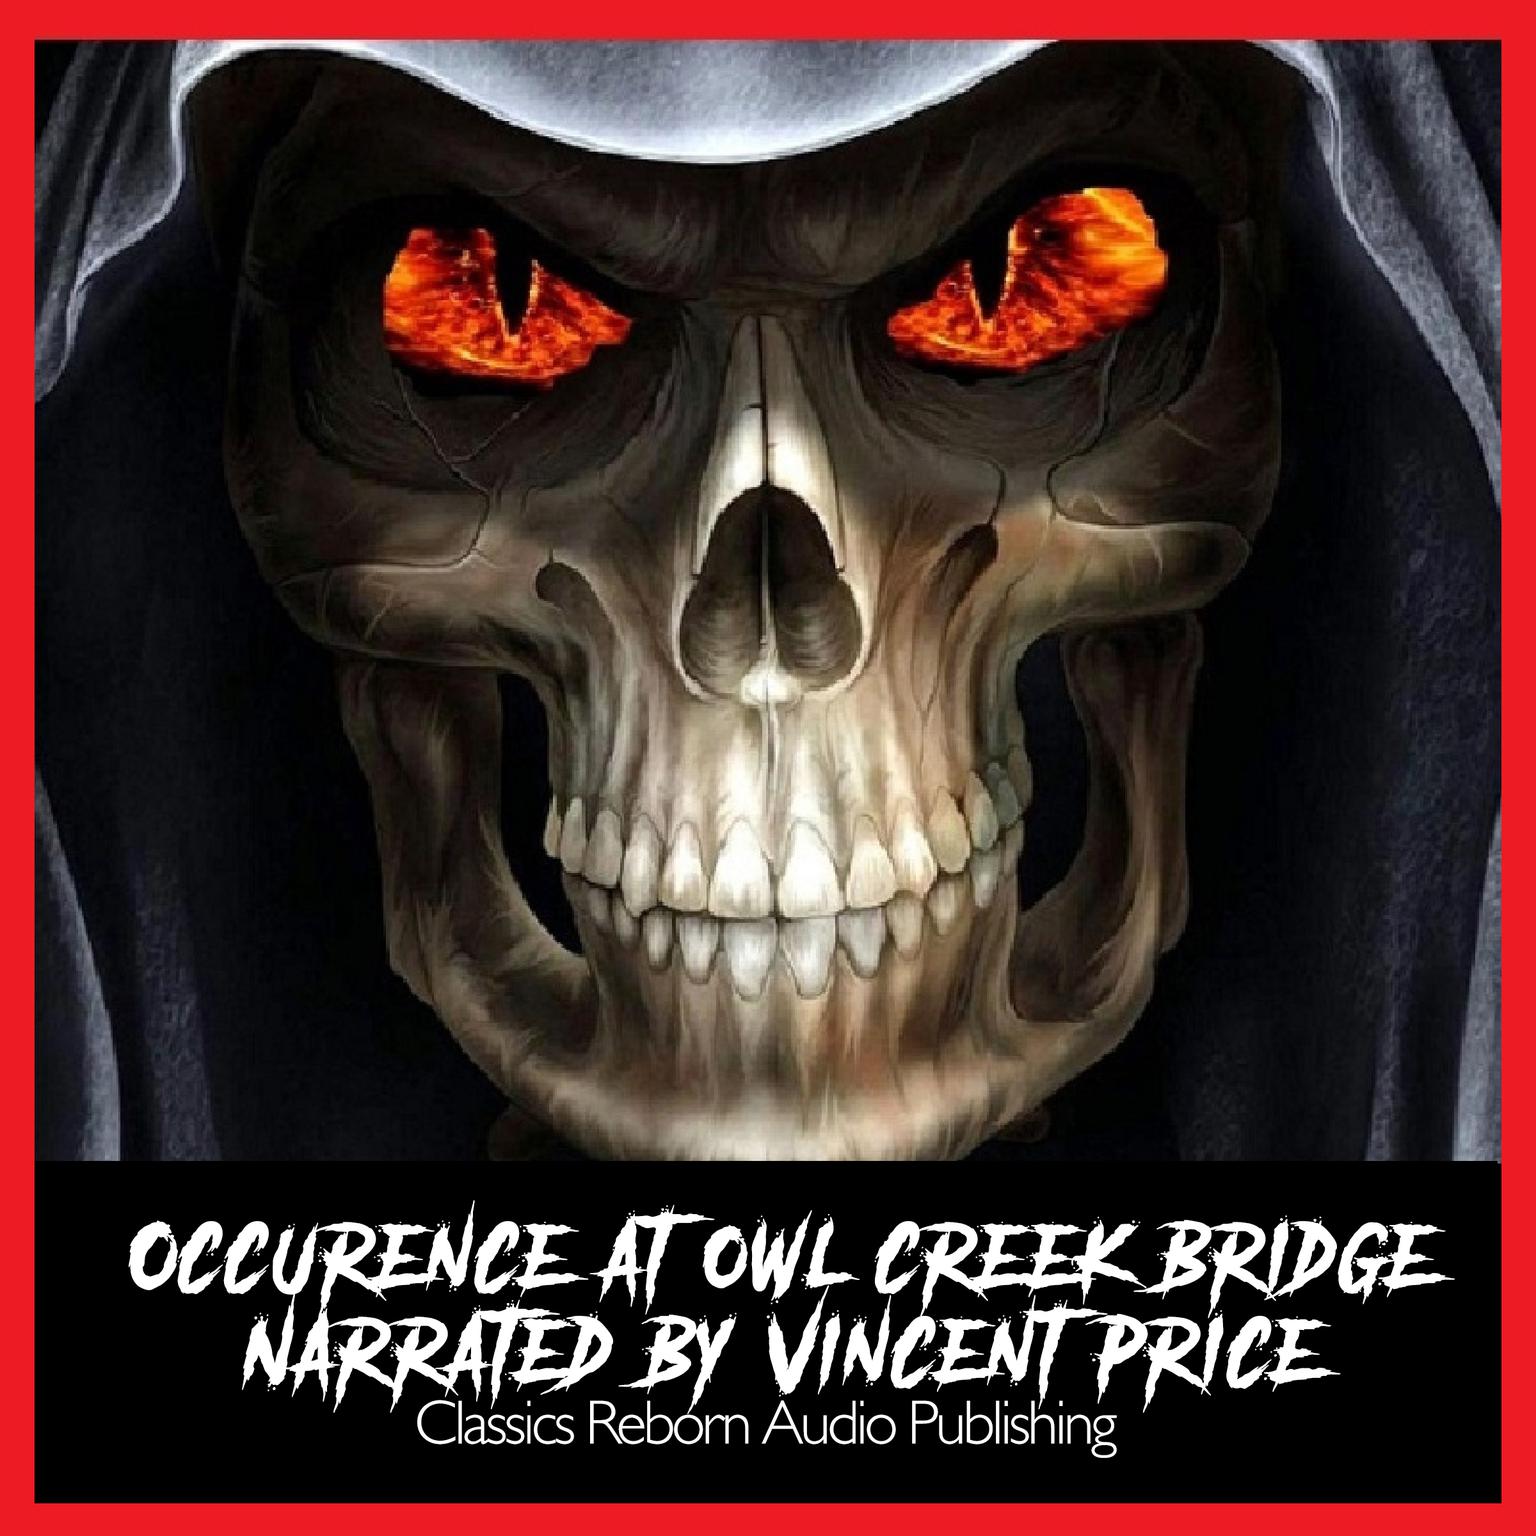 Suspense :Occurence At Owl Creek Bridge Narrated by  Vincent Price  Audiobook, by Classics Reborn Audio Publishing